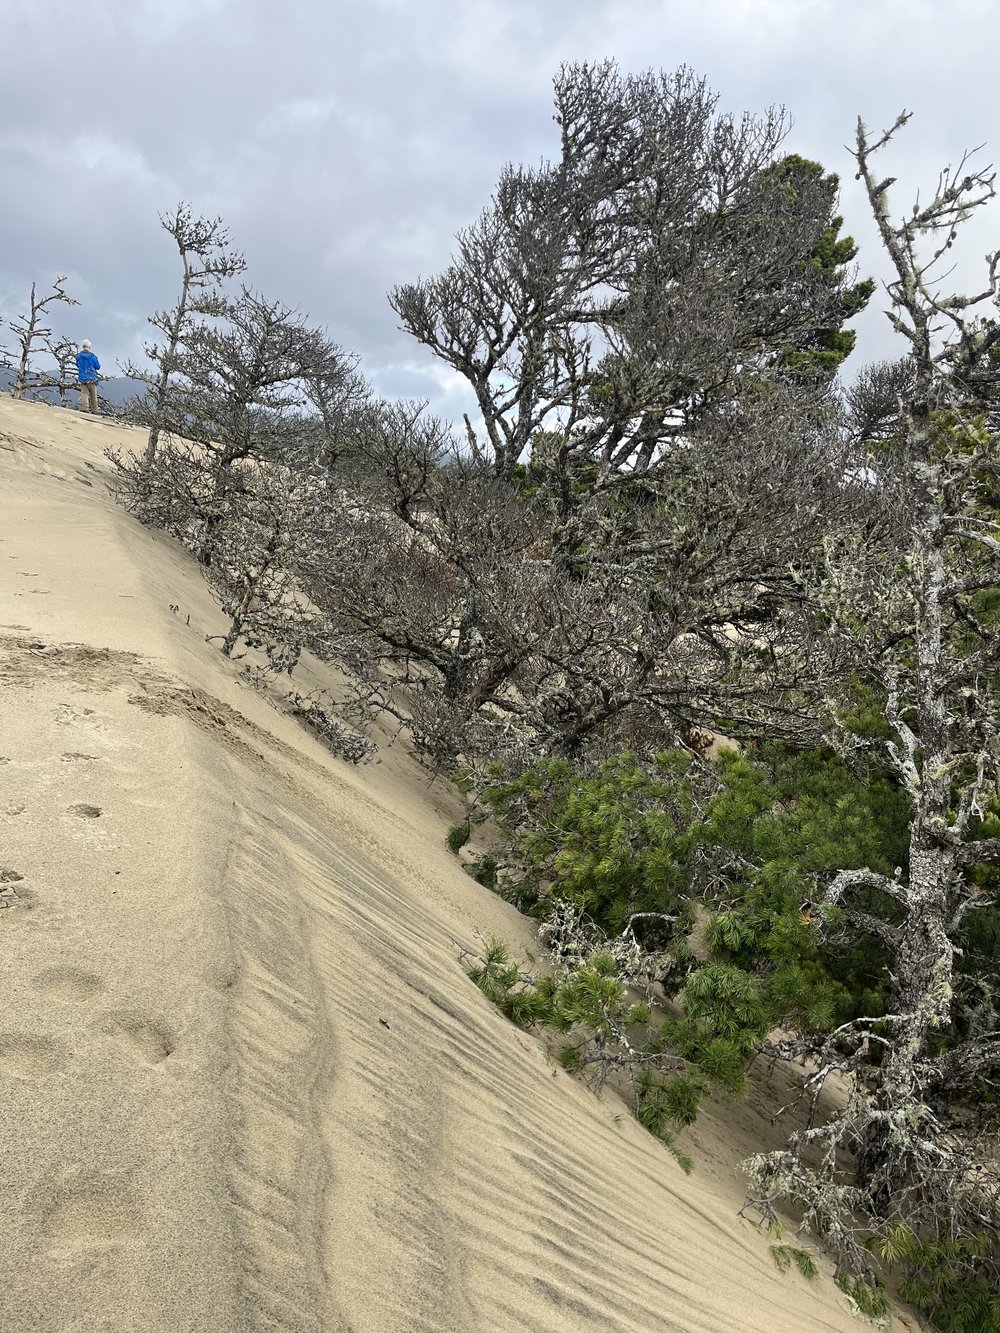  Dune movement in action. As the wind carries the sand onto the dune, the angle of the hill gets steep enough for the sand to slip forward and bury the trees, eventually turning them into a “ghost forest.” Photo by Justine Paradis. 